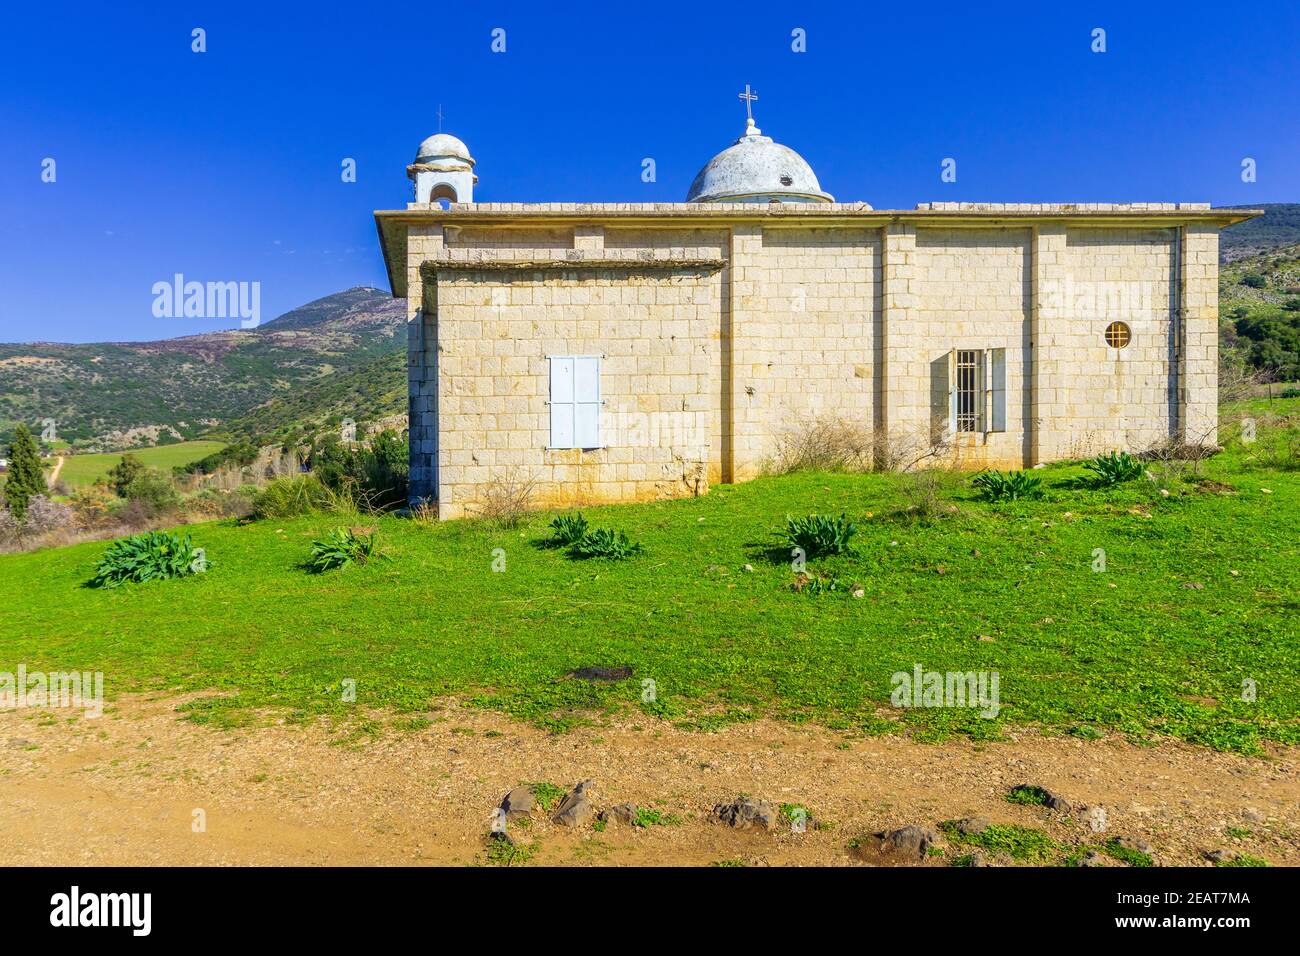 View of the Banias Spring Church, in the Golan Heights, Northern Israel Stock Photo